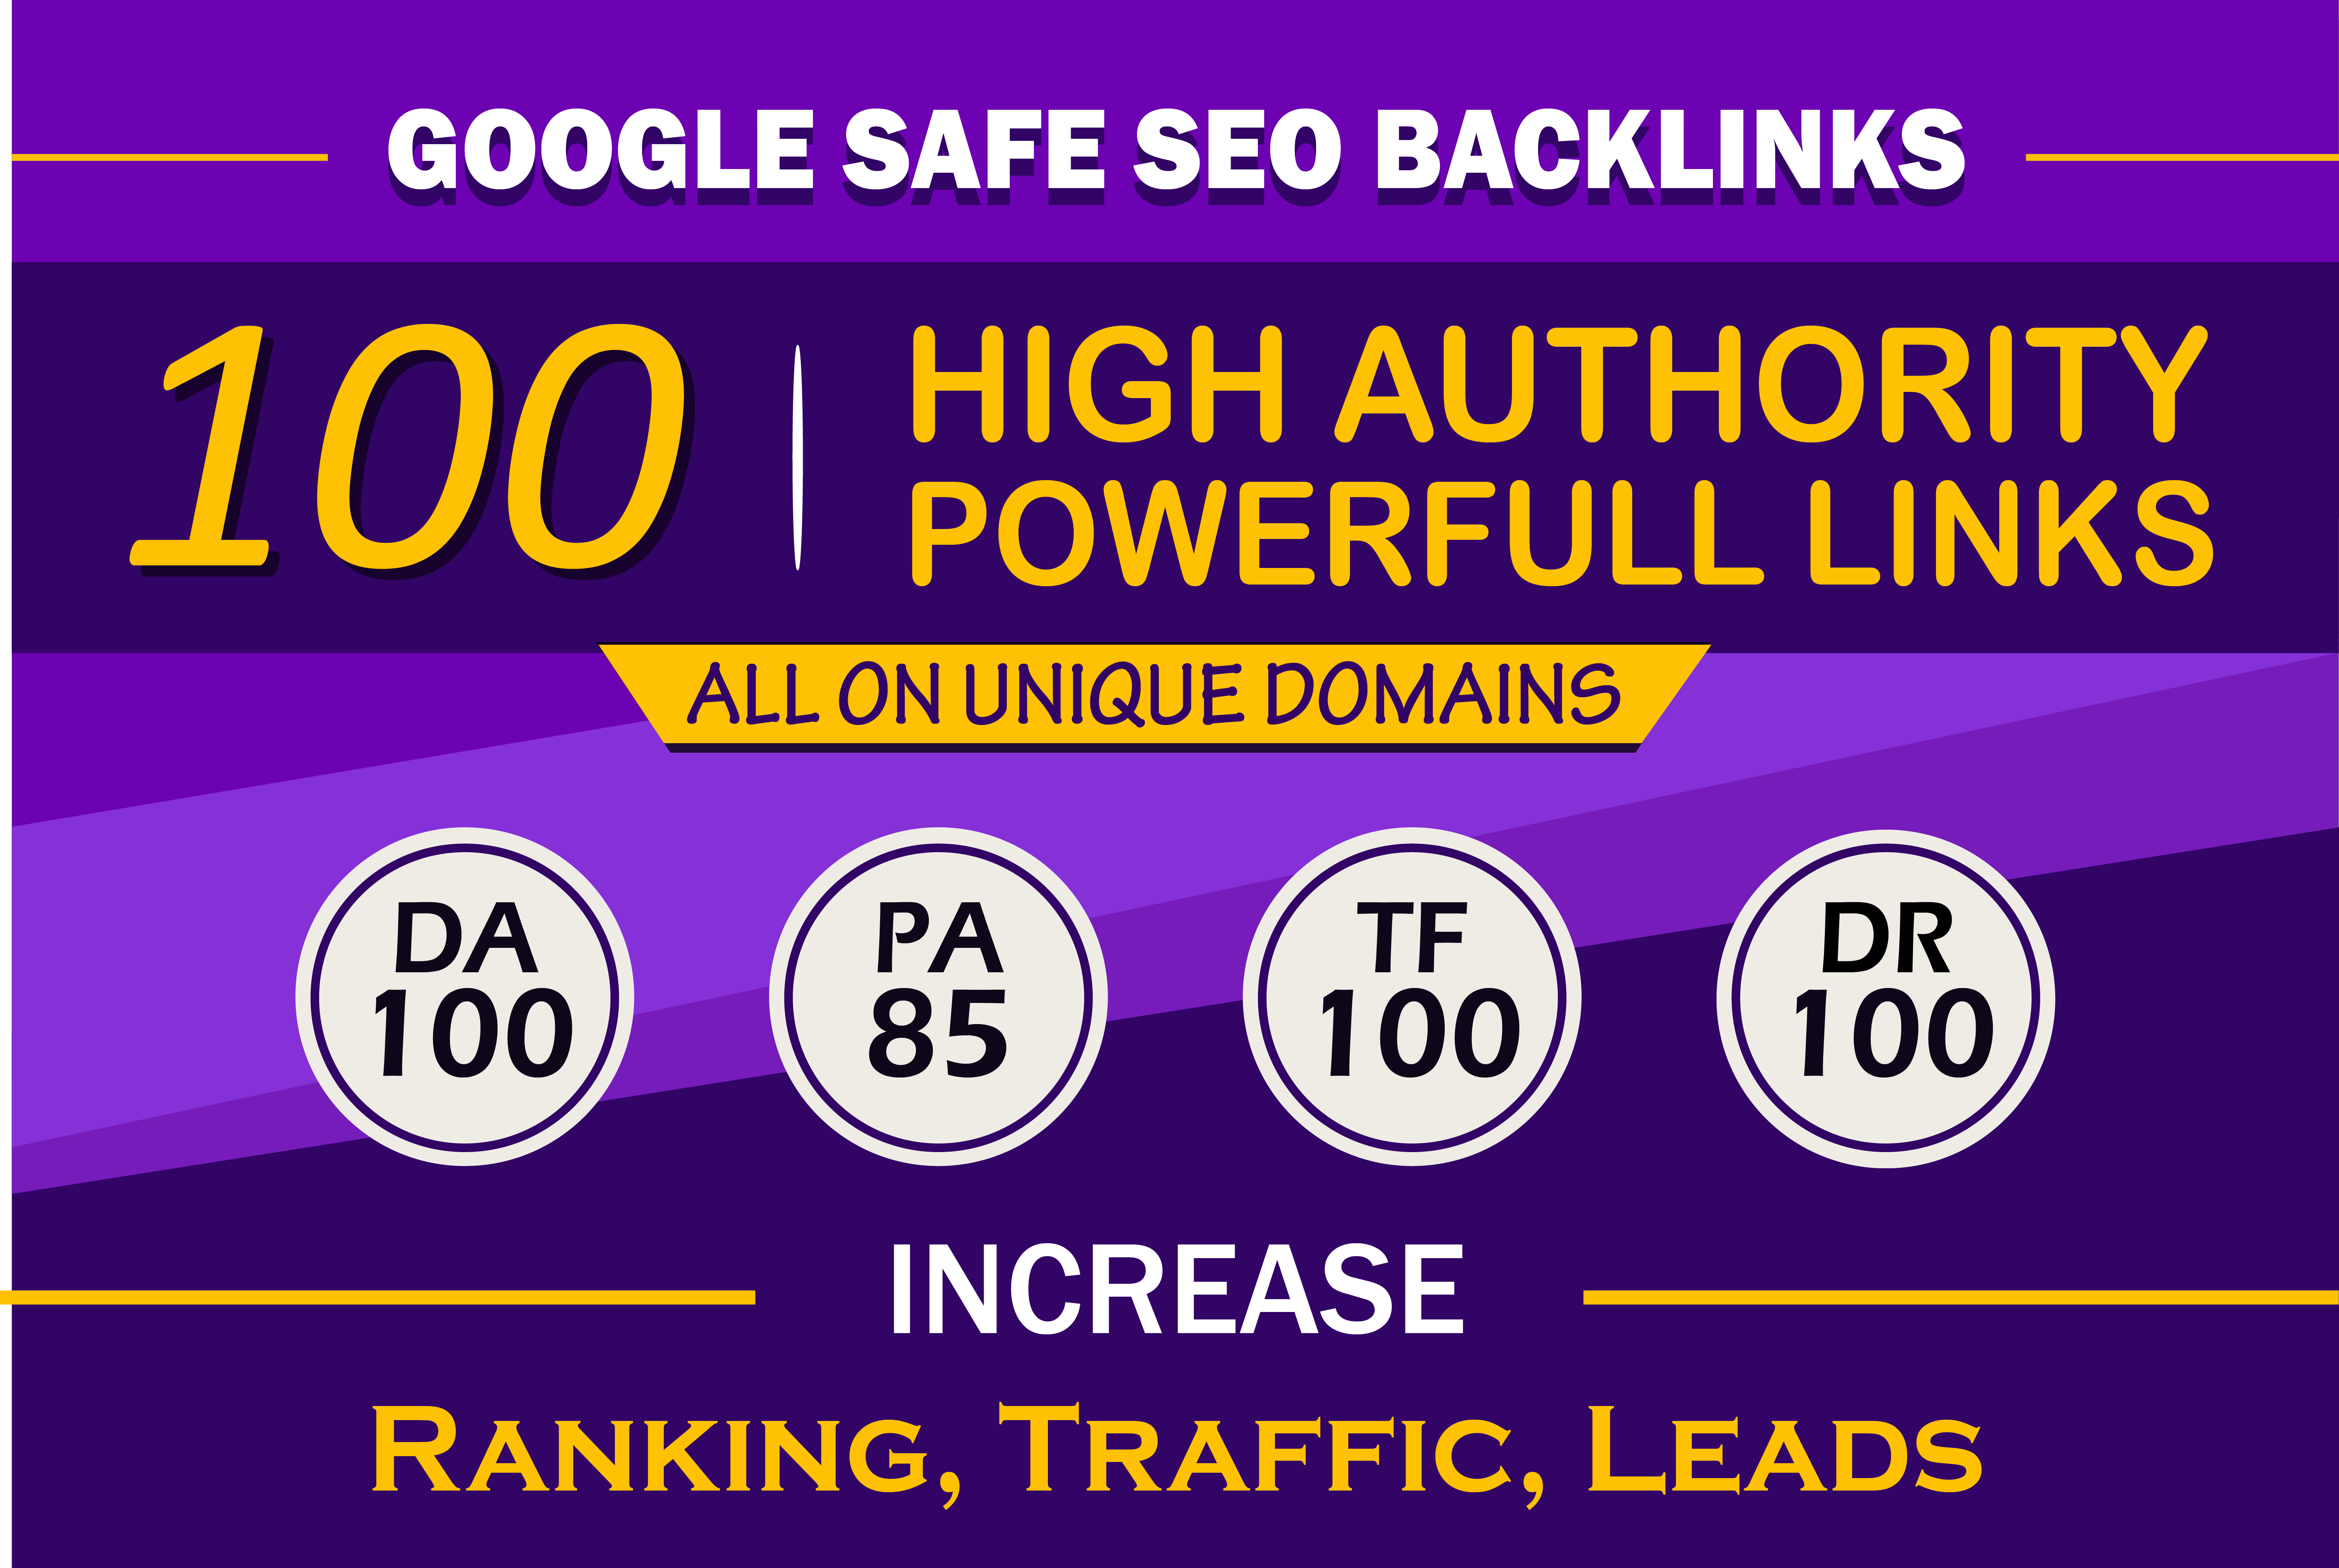 Boost your ranking on Google with 100 High Authority Seo Backlinks